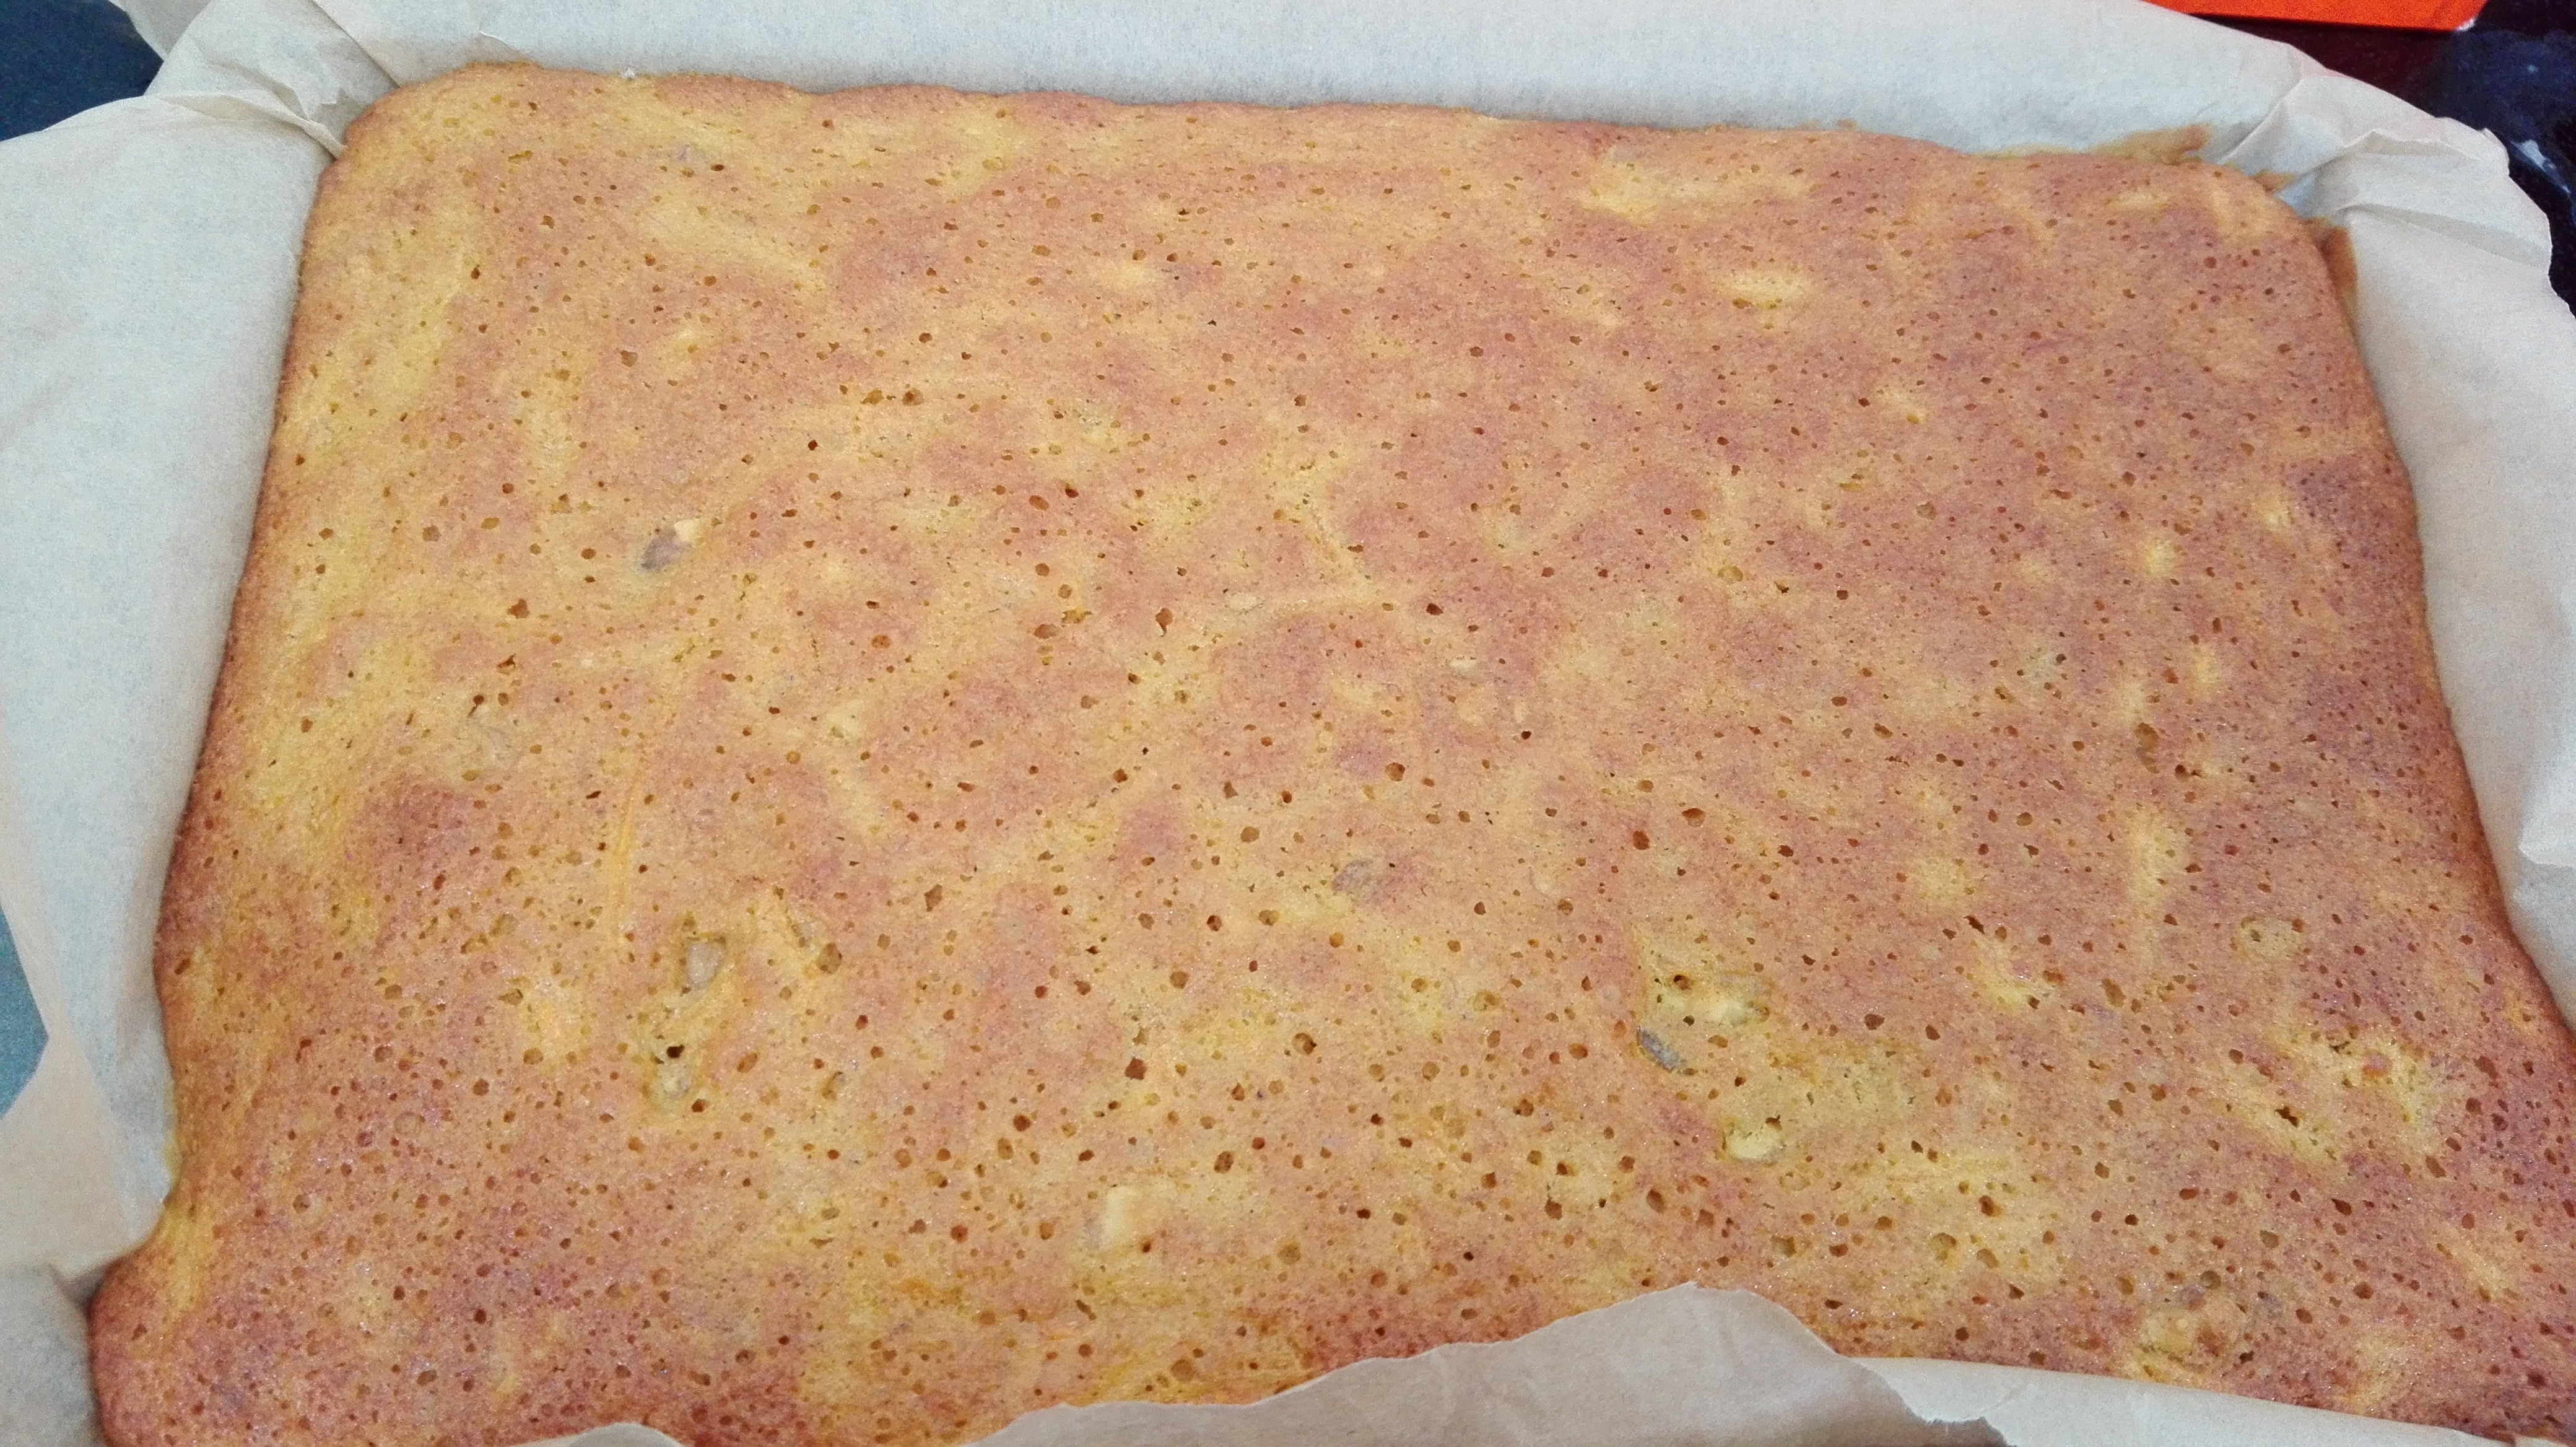 golden browned carrot cake fresh from the oven